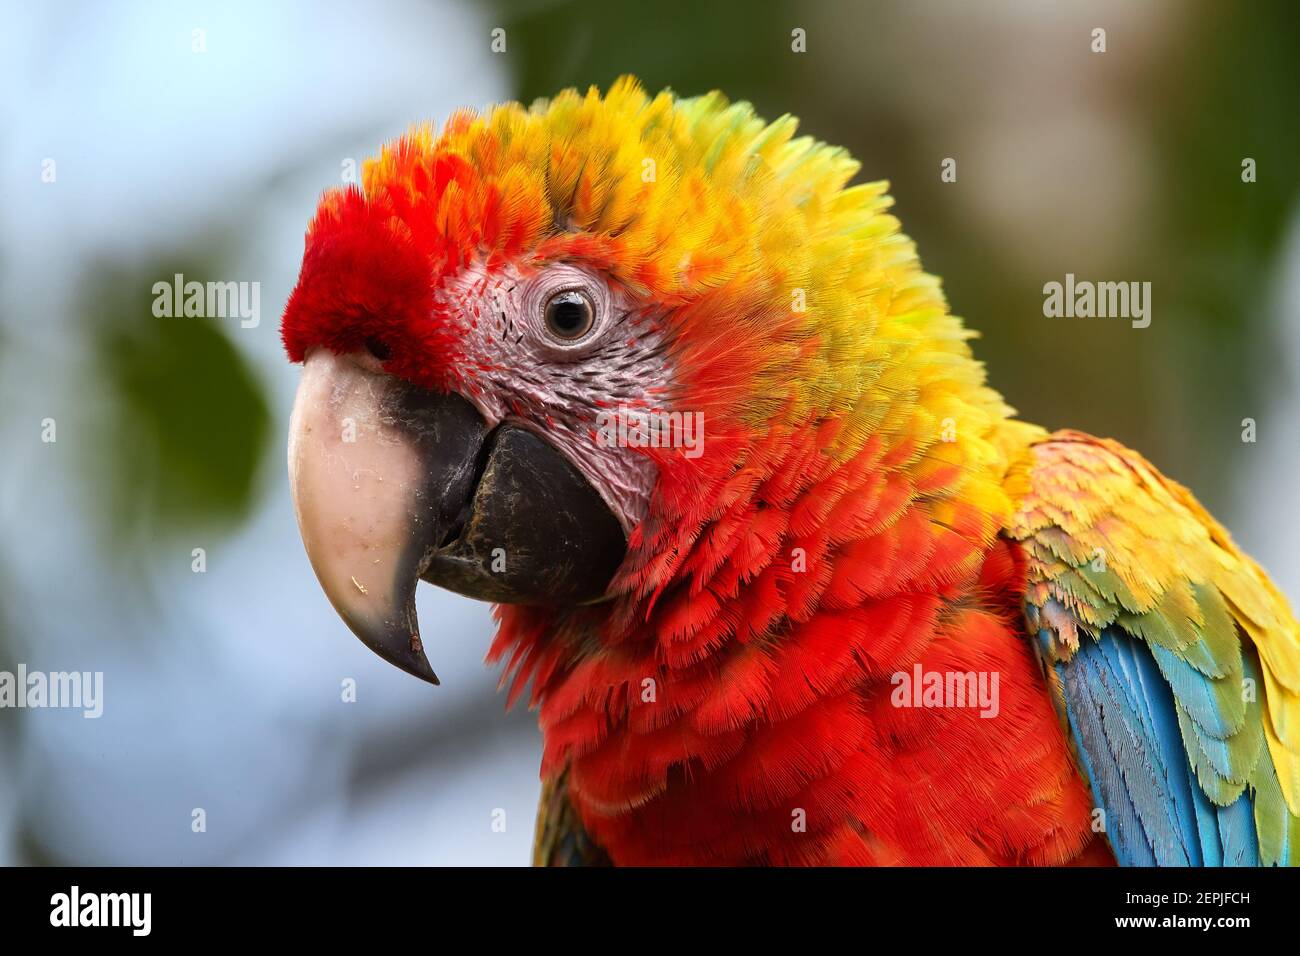 Portrait of Ara parrot, Scarlet Macaw and Great green macaw hybrid, portrait of red and green, colorful amazonian parrot. Wild animal.. Stock Photo